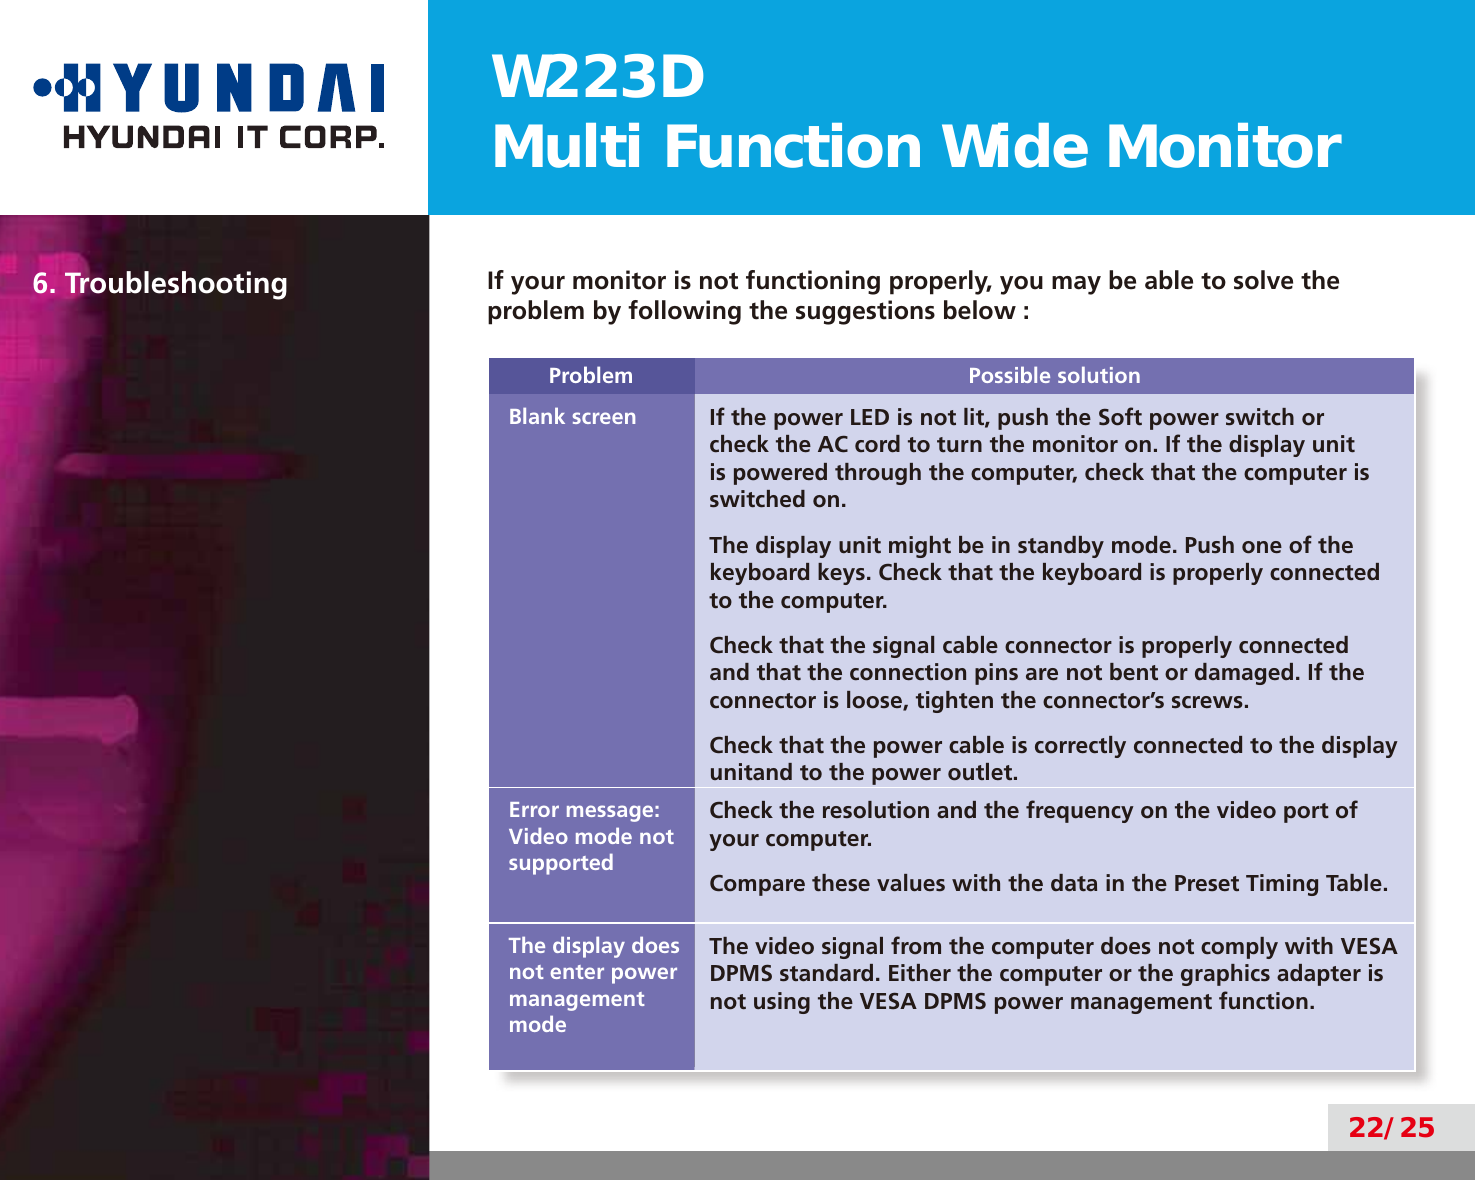 W223DMulti Function Wide Monitor22/256. Troubleshooting If your monitor is not functioning properly, you may be able to solve the problem by following the suggestions below :Problem Possible solutionBlank screen If the power LED is not lit, push the Soft power switch or check the AC cord to turn the monitor on. If the display unit is powered through the computer, check that the computer is switched on.The display unit might be in standby mode. Push one of the keyboard keys. Check that the keyboard is properly connected to the computer.Check that the signal cable connector is properly connected and that the connection pins are not bent or damaged. If the connector is loose, tighten the connector’s screws.Check that the power cable is correctly connected to the display unitand to the power outlet.Error message:Video mode not supportedCheck the resolution and the frequency on the video port of your computer.Compare these values with the data in the Preset Timing Table.The display does not enter power management modeThe video signal from the computer does not comply with VESA DPMS standard. Either the computer or the graphics adapter is not using the VESA DPMS power management function.